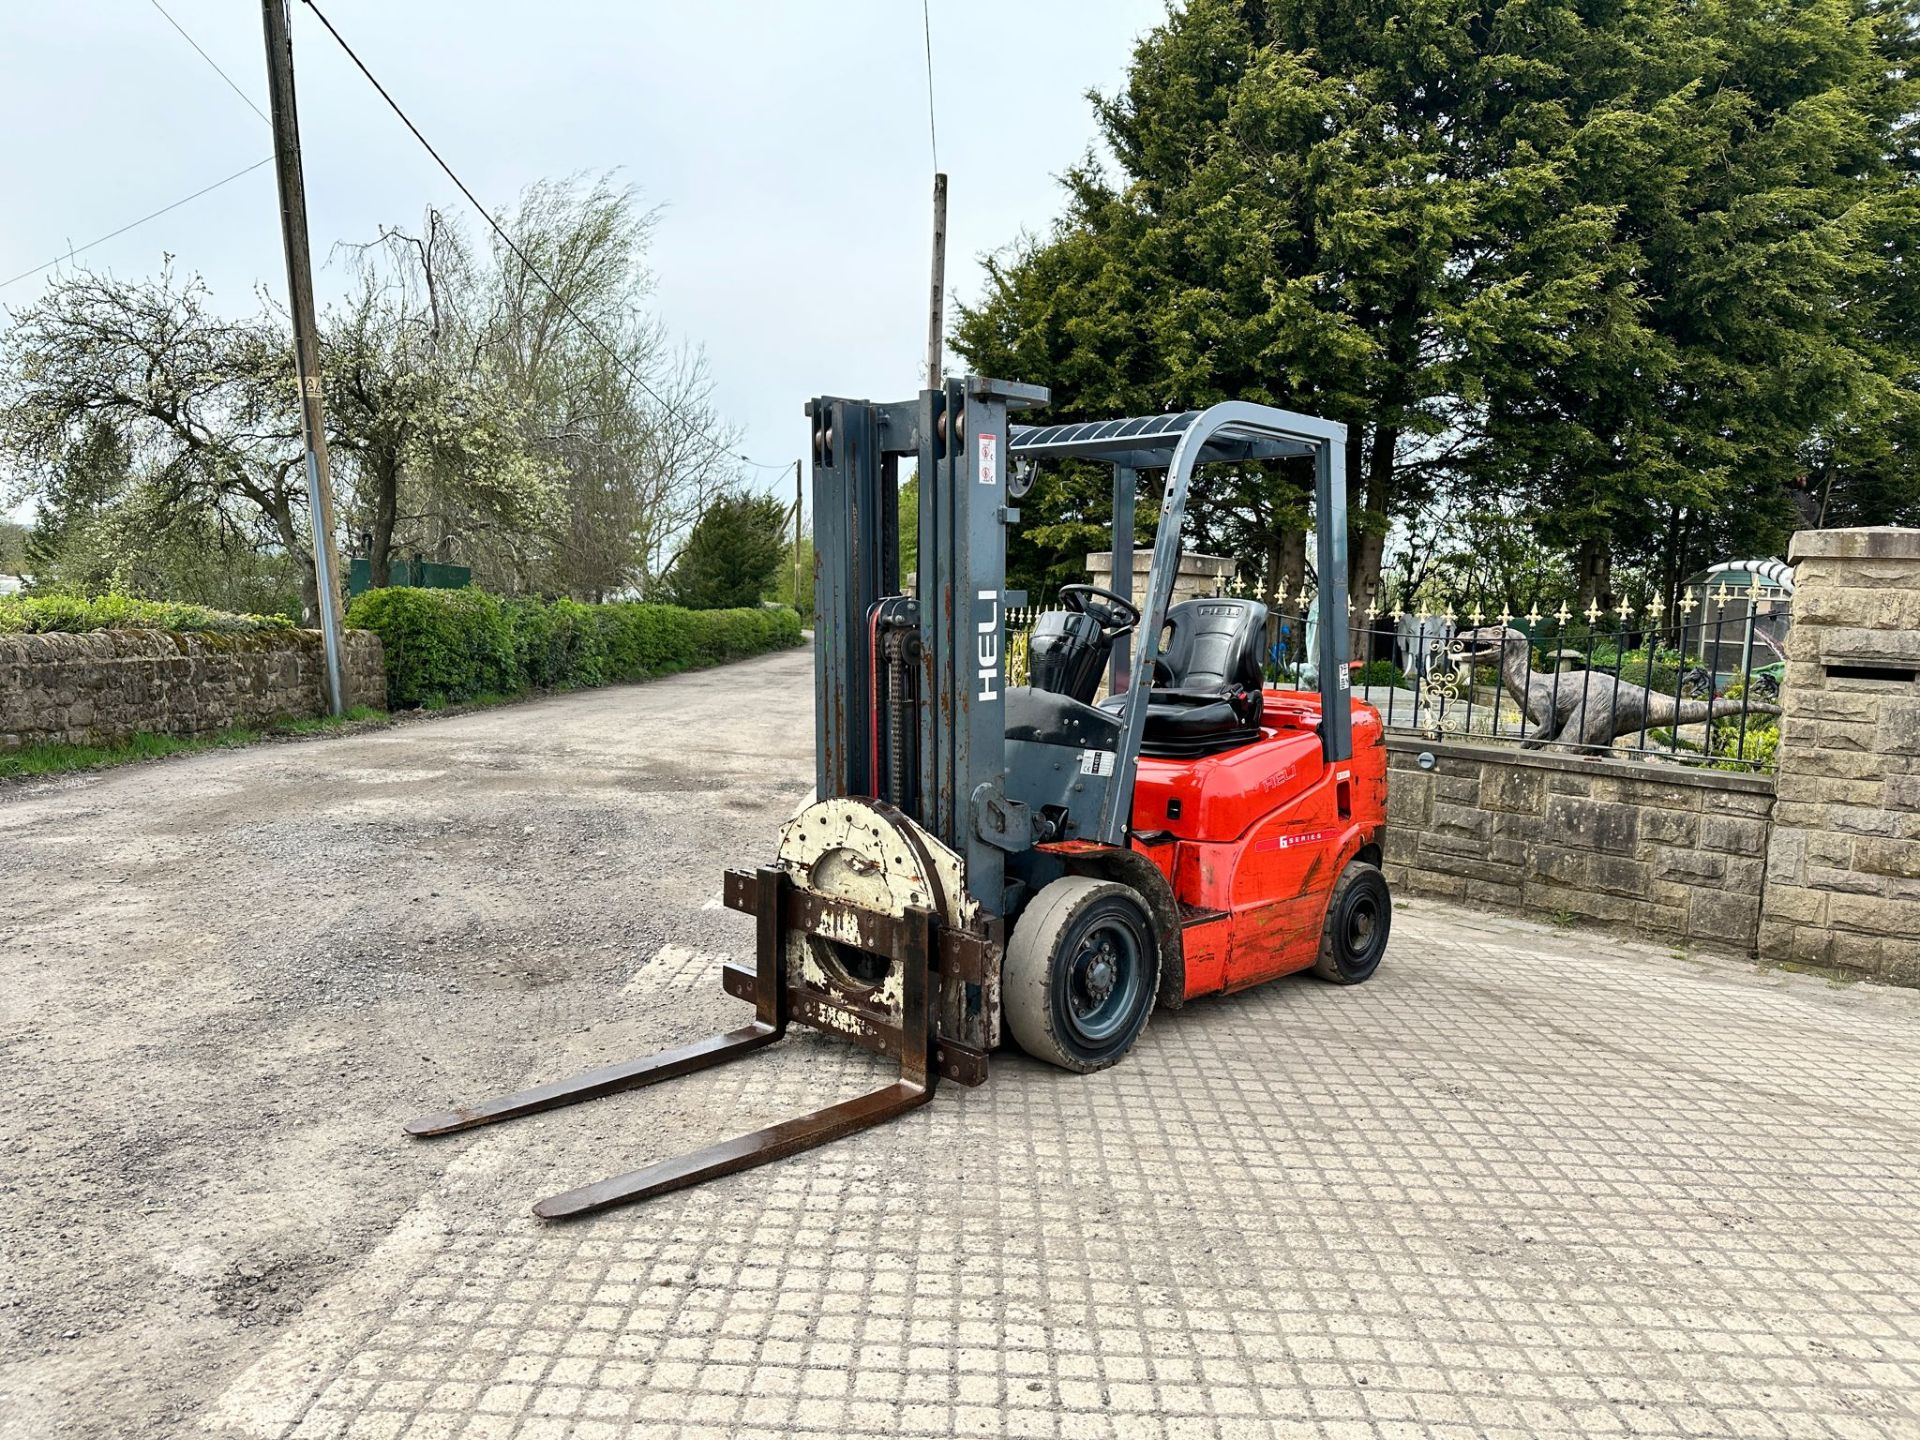 2019 HELI FD25G 2.5 TON DIESEL FORKLIFT WITH 360 ROTATING FORK CARRIAGE *PLUS VAT* - Image 2 of 13